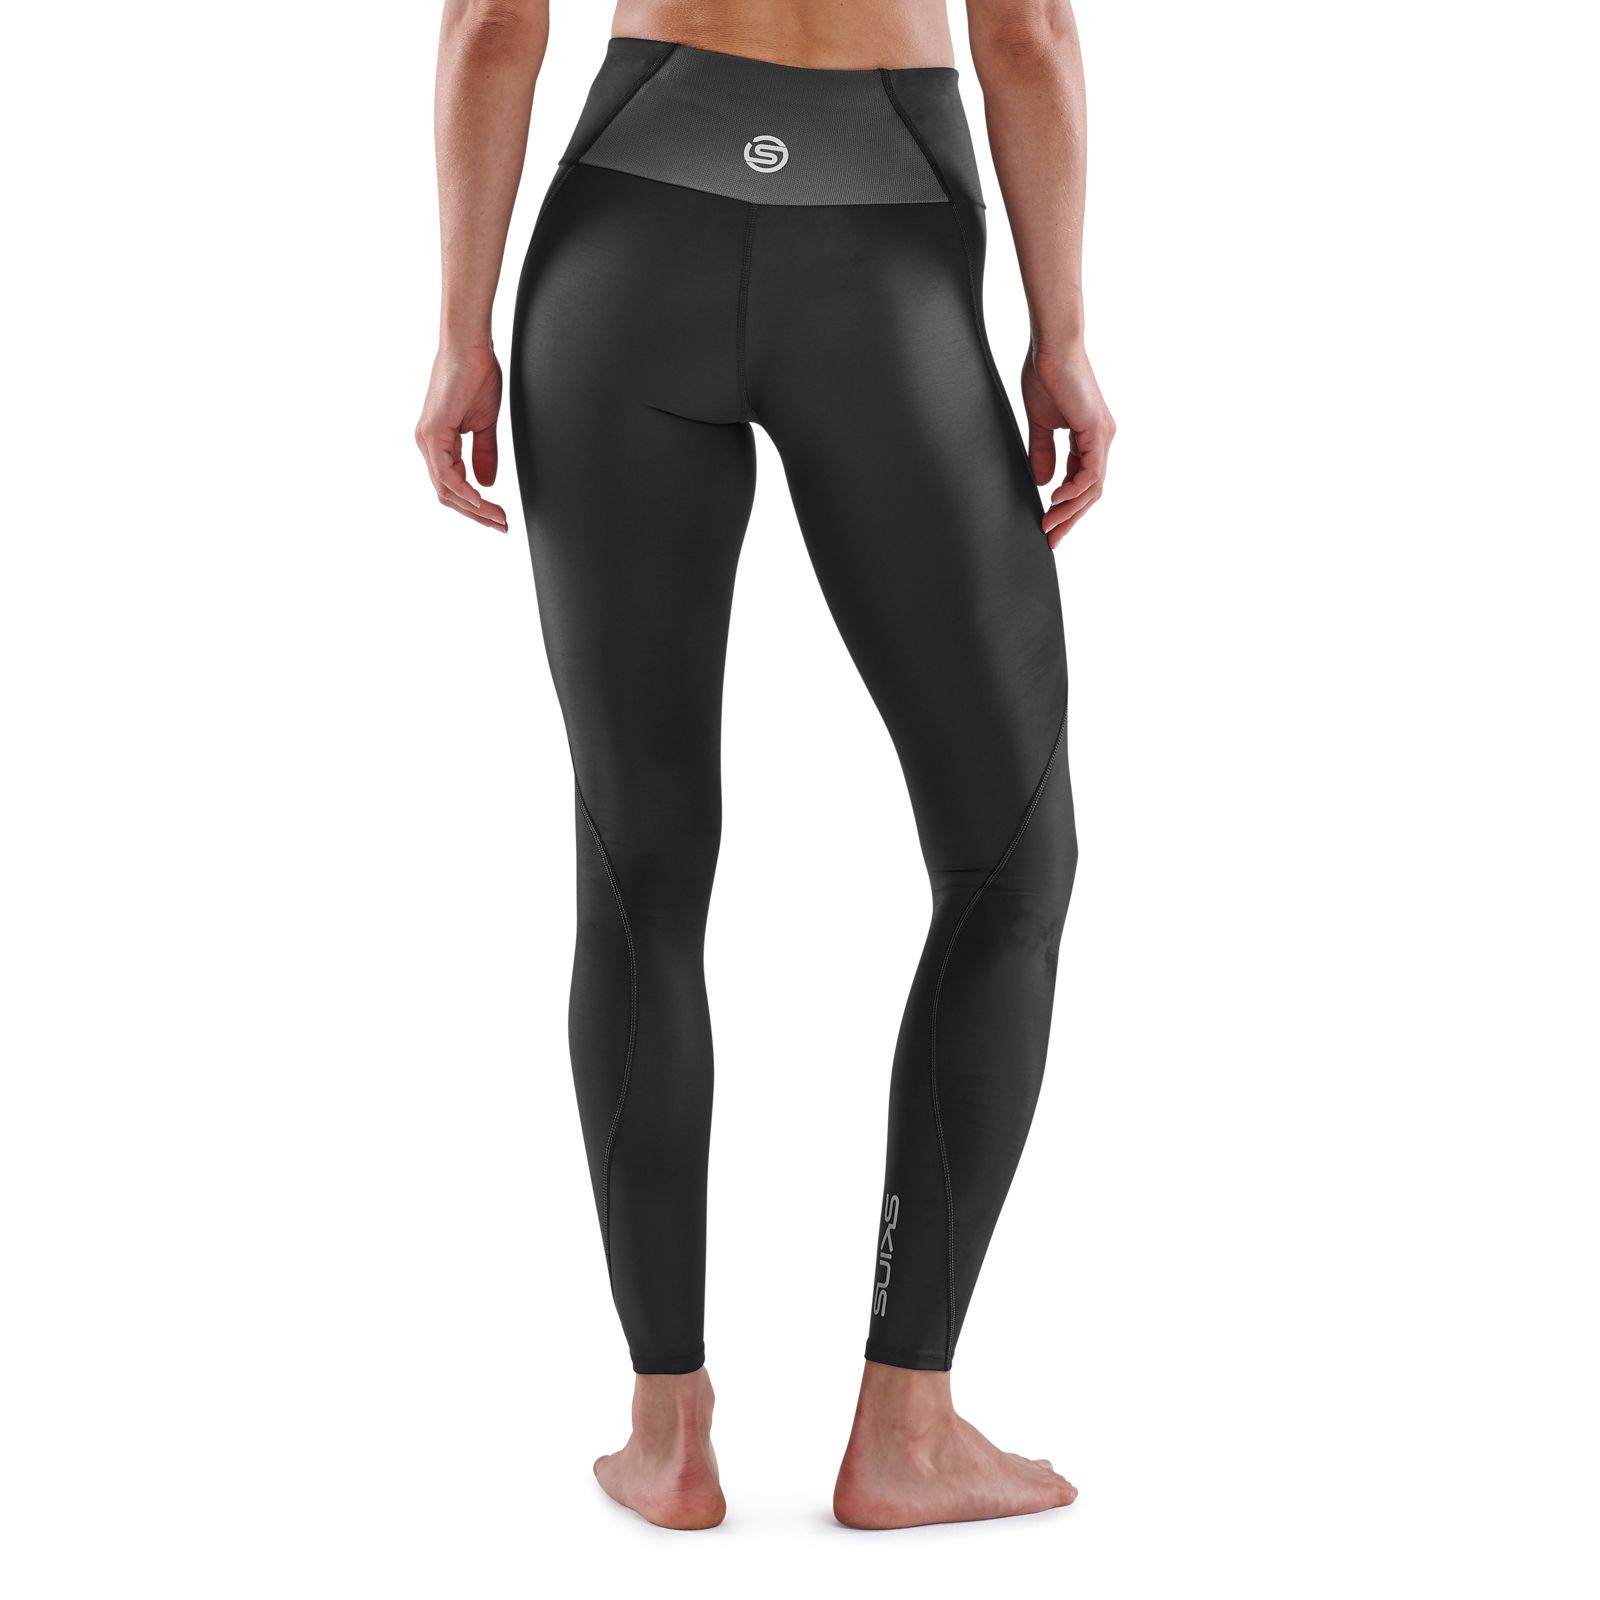  Skins Women's A200 Compression Long Tights, Gloss